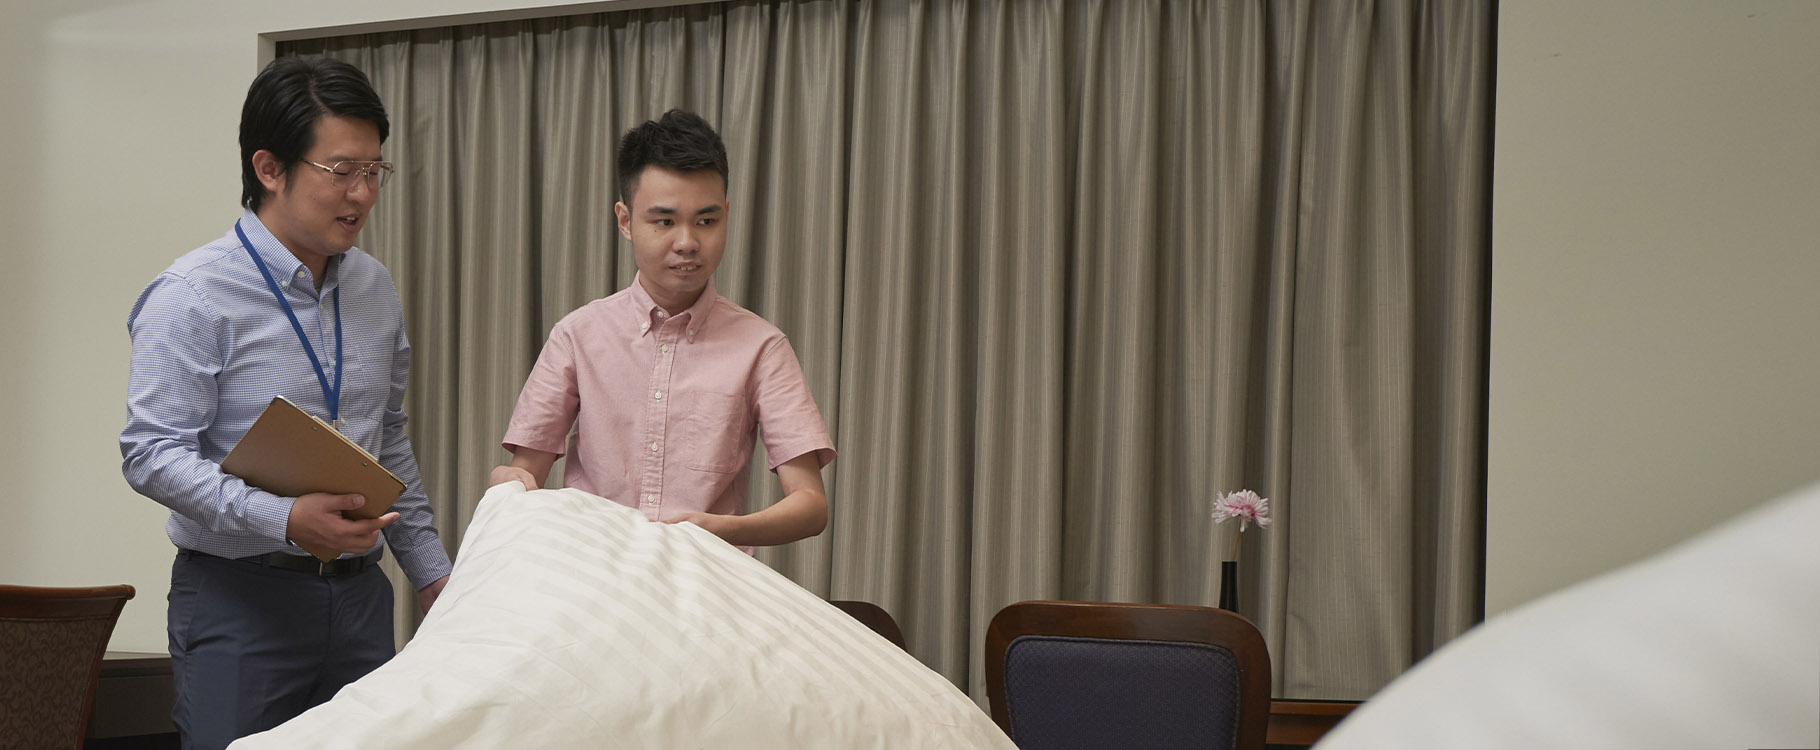 A professional guiding a person with disability in housekeeping duties such as neatly making beds.